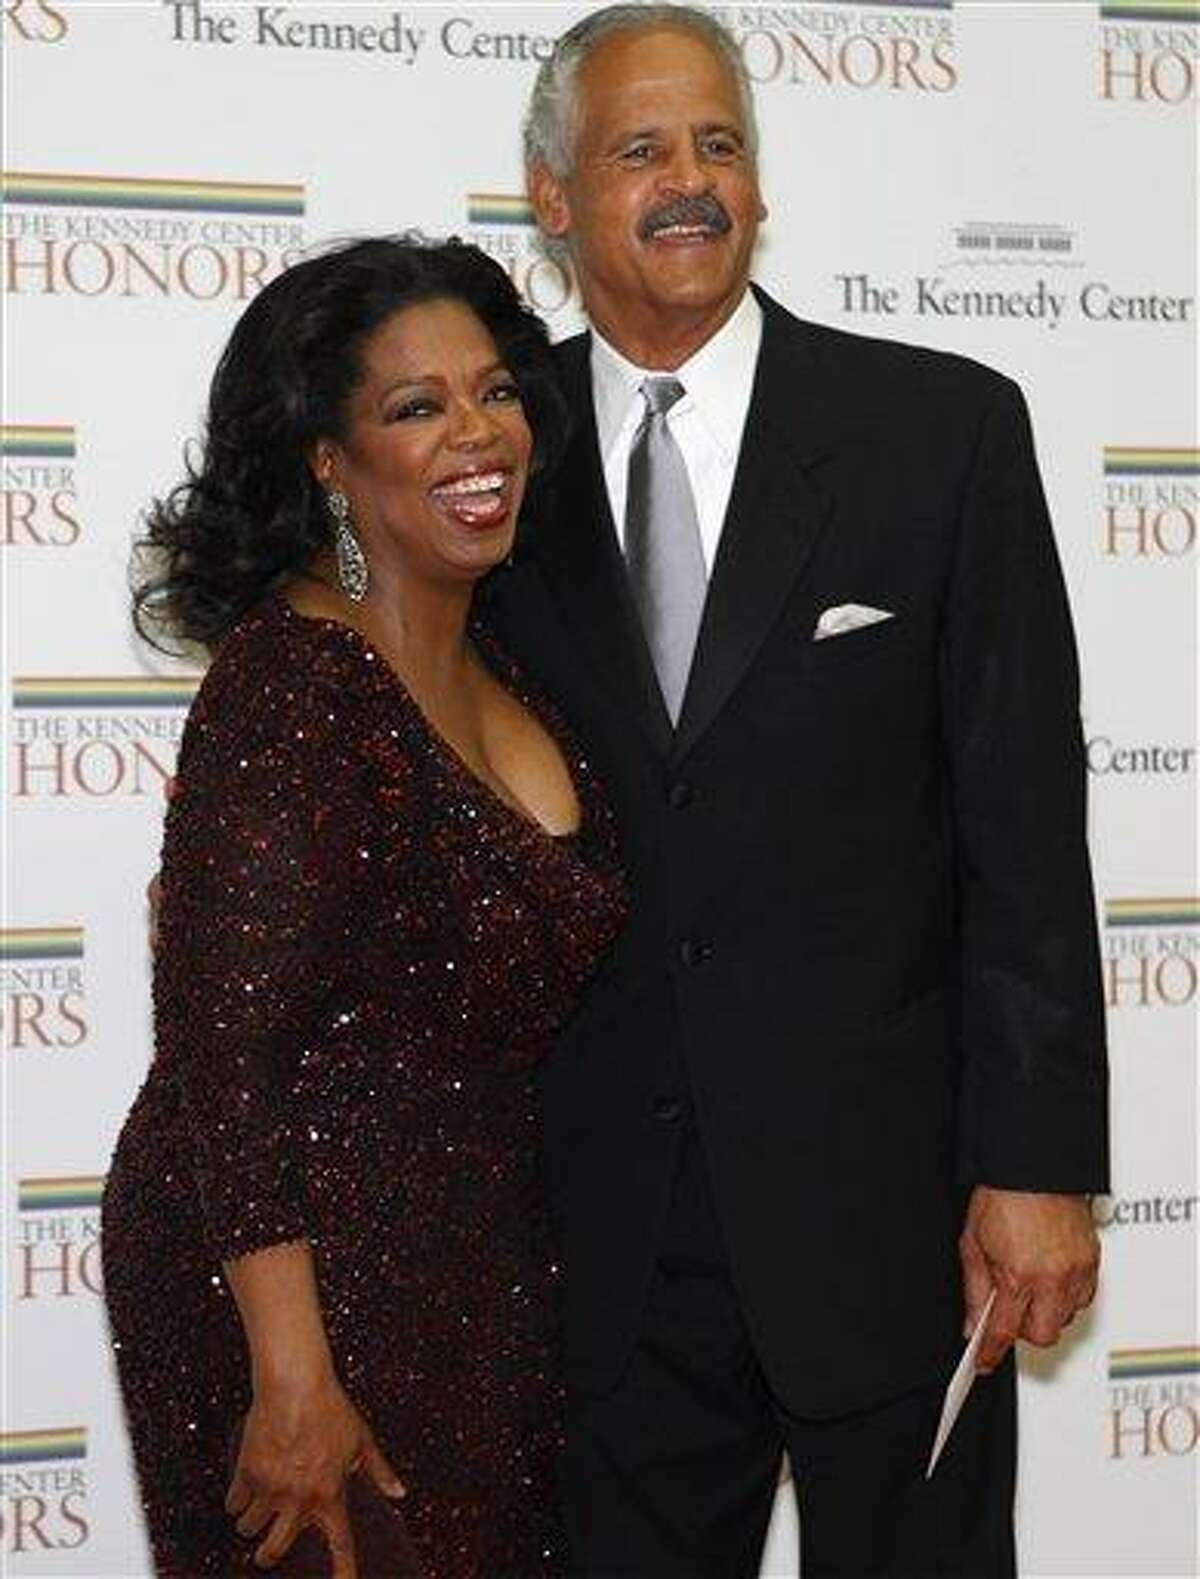 Oprah Winfrey and date Stedman Graham pose on the read carpet on arrival at a dinner held at the State Department honoring the recipients of the Kennedy Center Honors, in Washington, on Saturday, Dec. 4, 2010. The honorees are Winfrey, Merle Haggard, Jerry Herman, Bill T. Jones, and Paul McCartney. (AP Photo/Jacquelyn Martin)